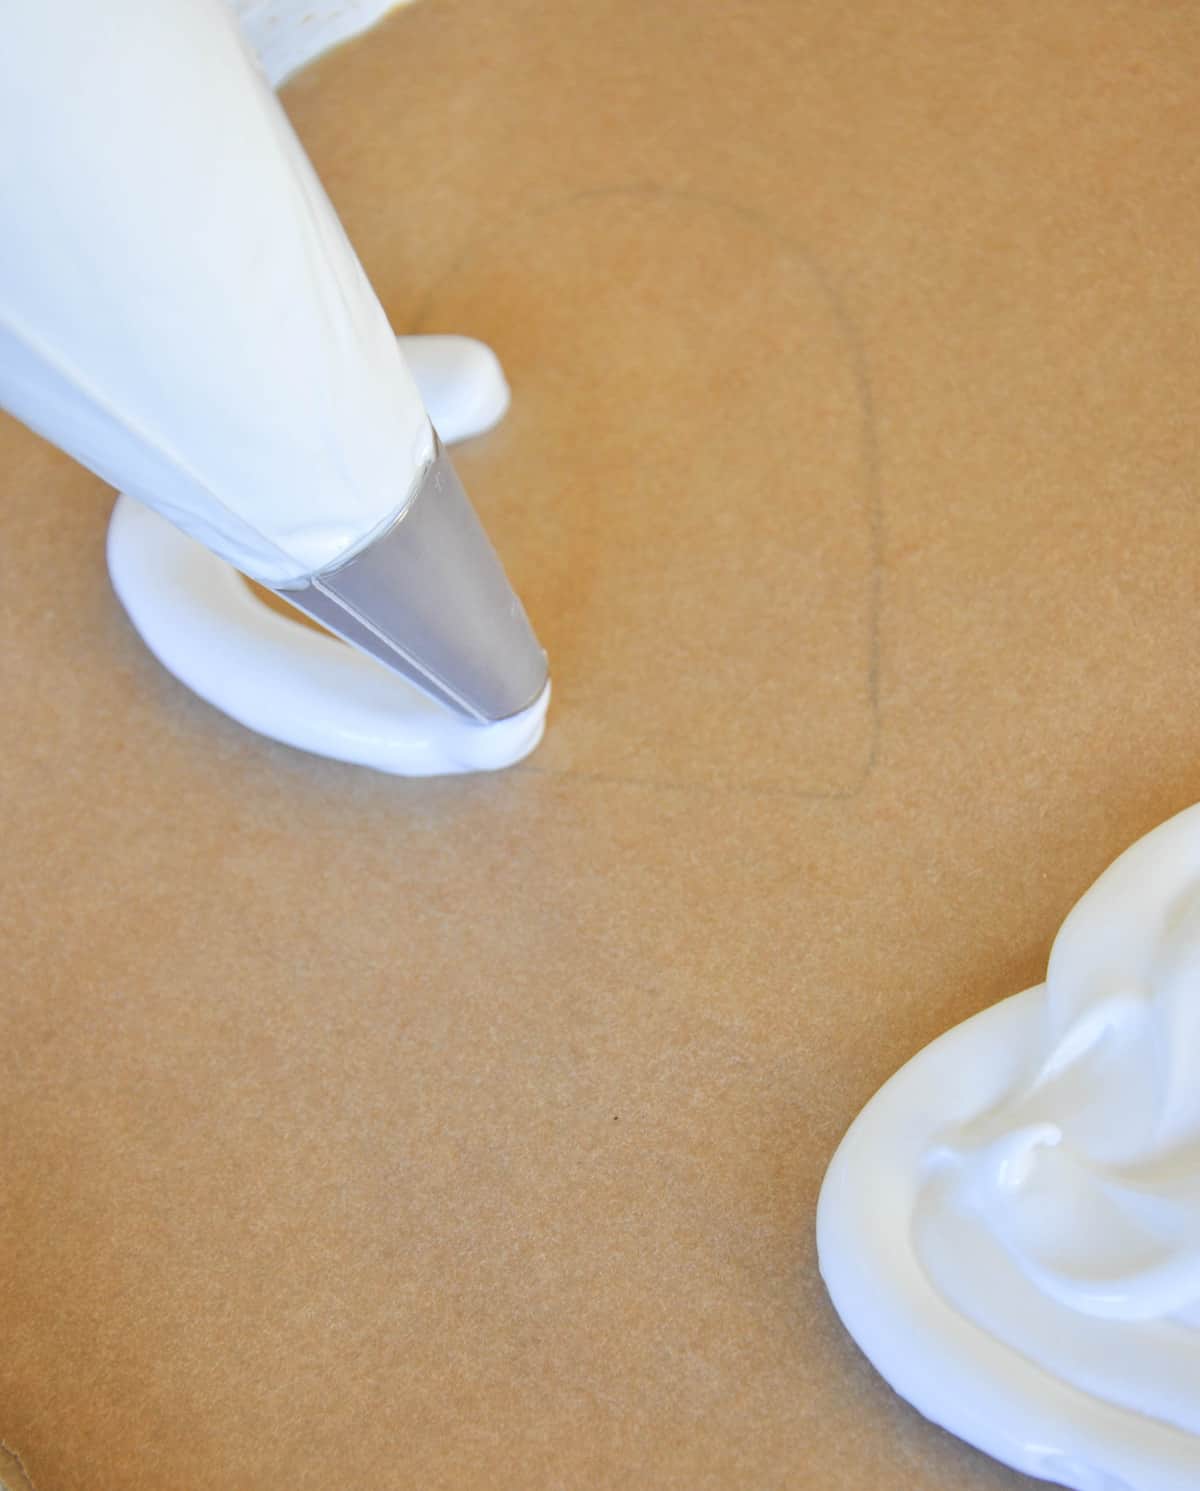 Piping the meringue onto the traced hearts